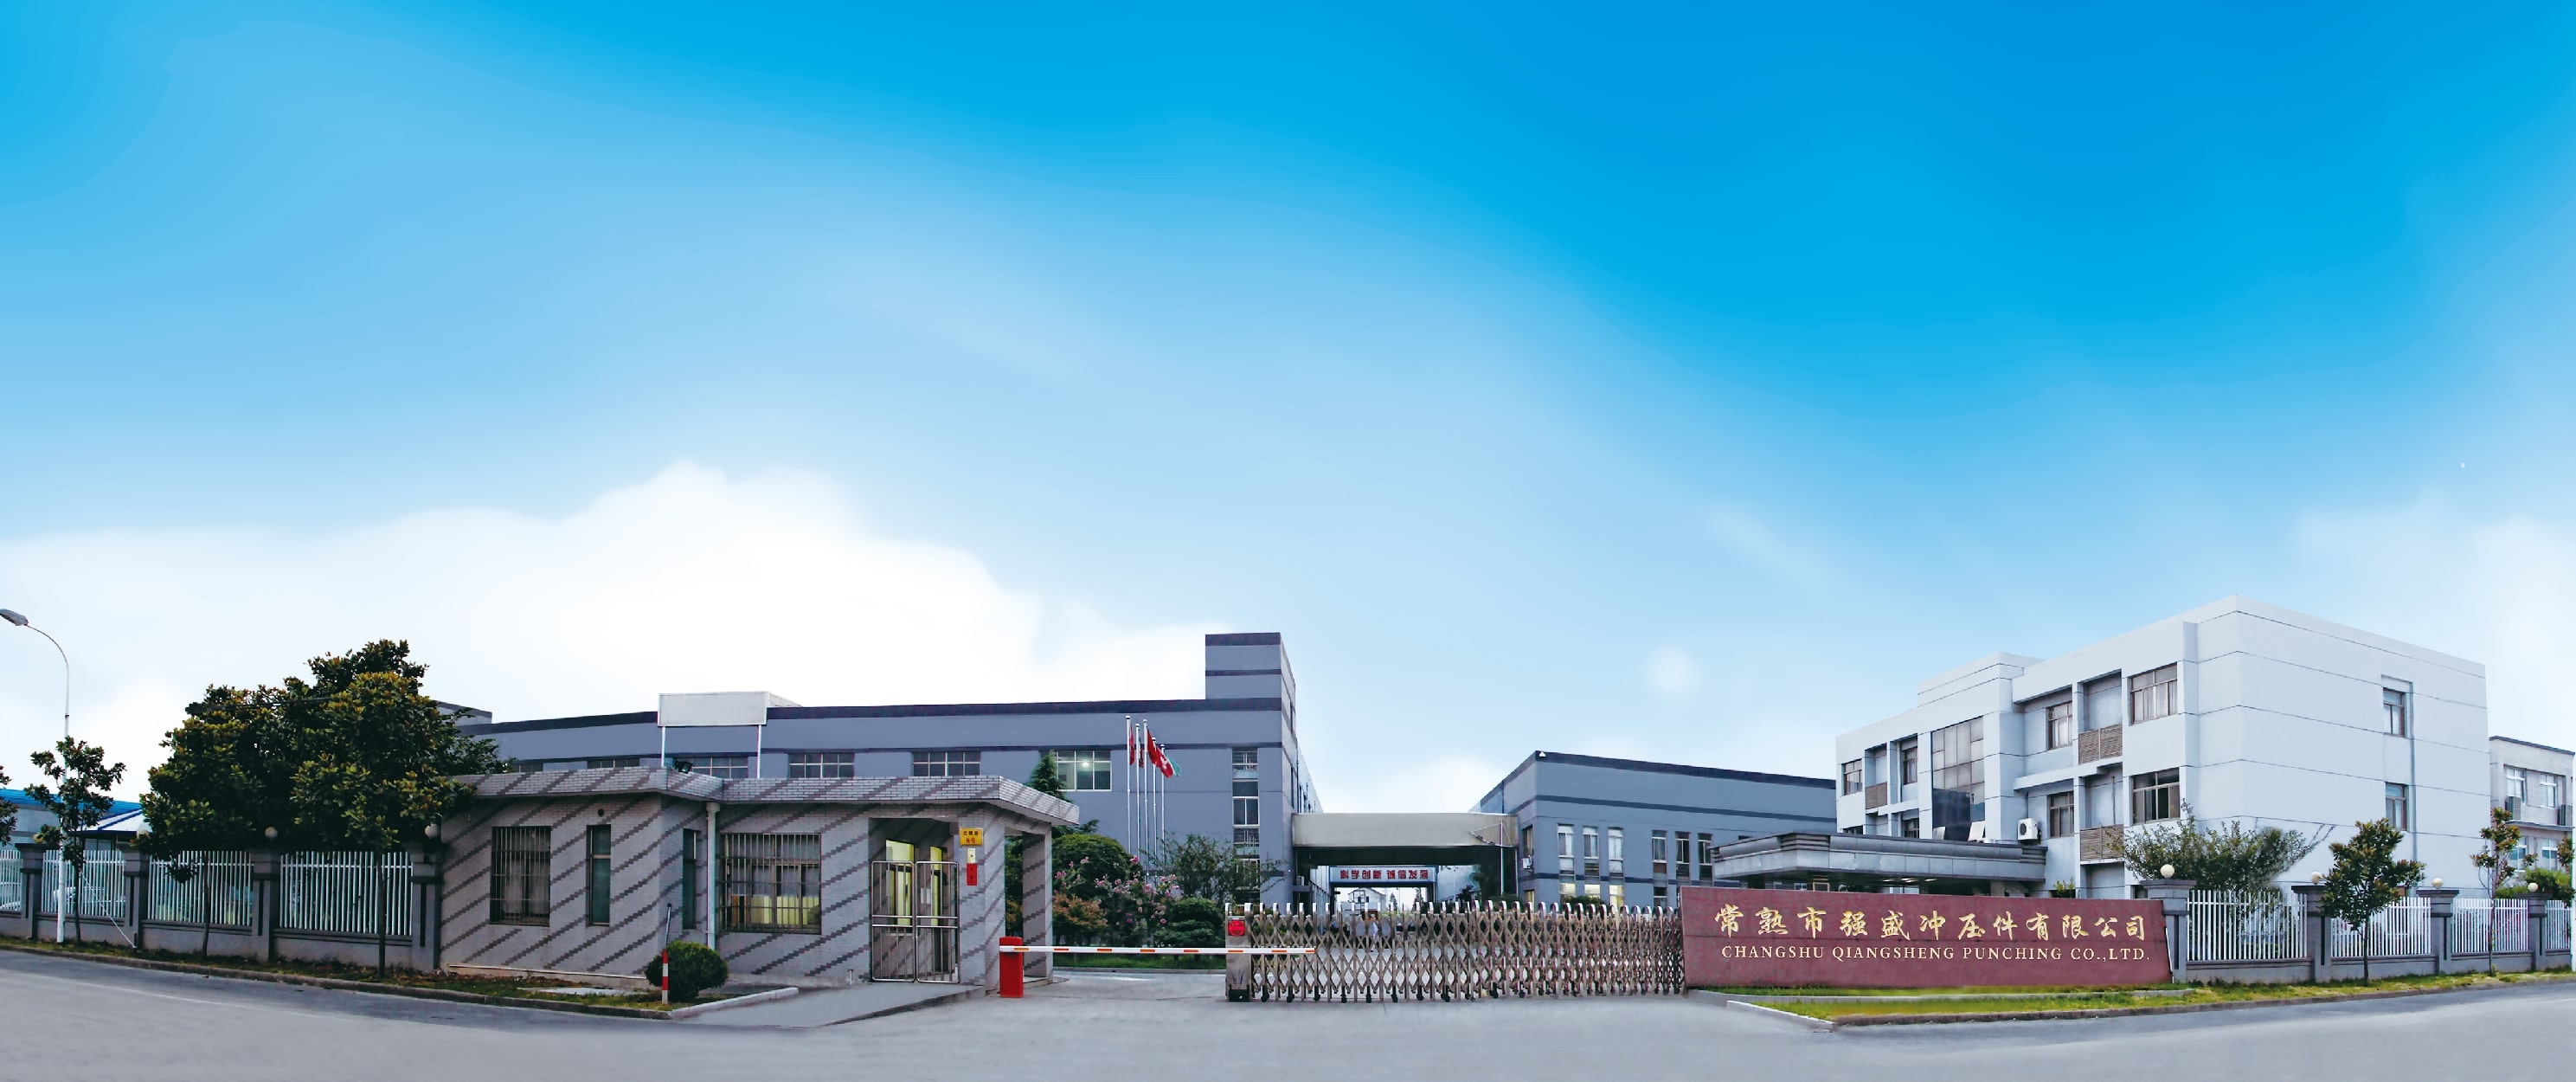 Qiangsheng aims to deliver high quality metal products to our customers worldwide.